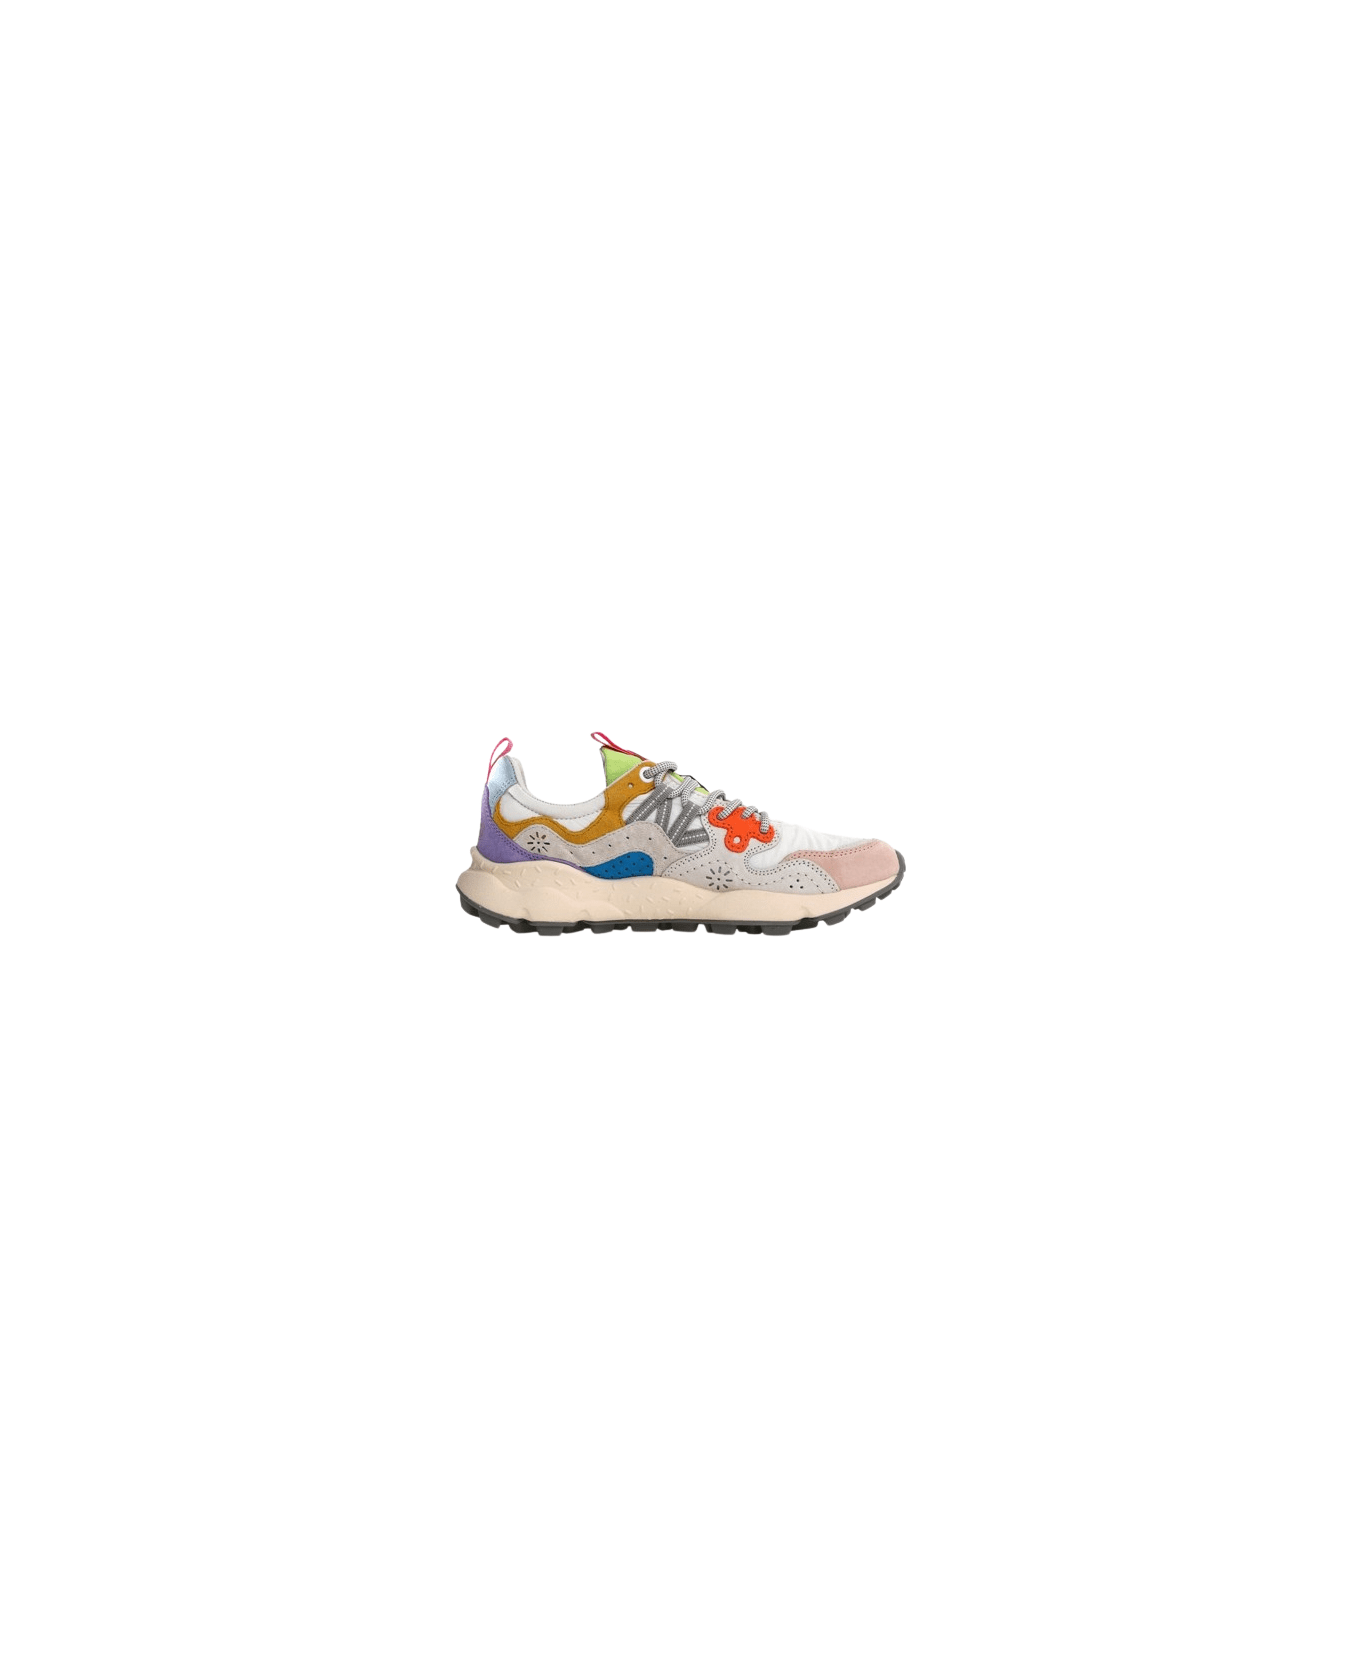 Flower Mountain Yamano3 Sneakers - Multicolor スニーカー